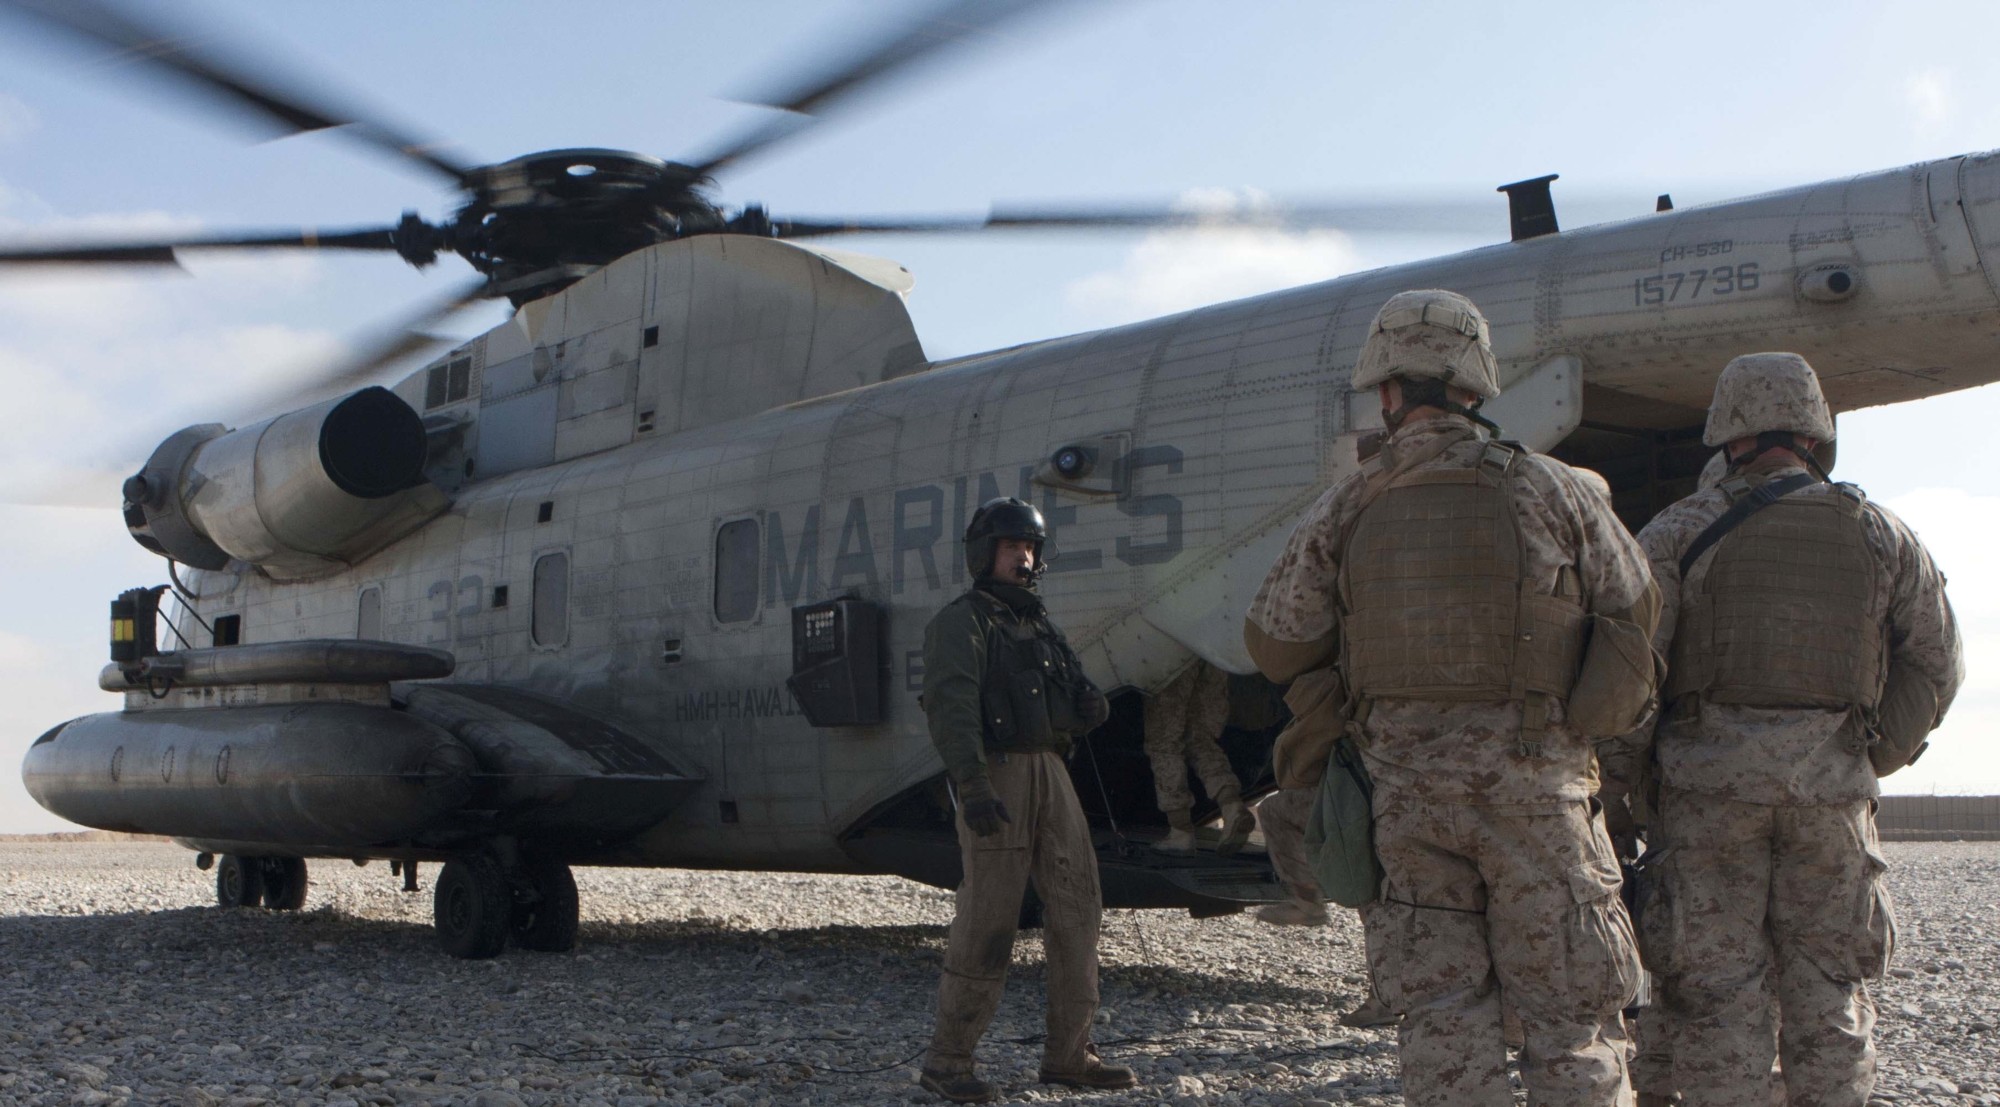 hmh-363 red lions marine heavy helicopter squadron usmc sikorsky ch-53d sea stallion 35 helmand province afghanistan